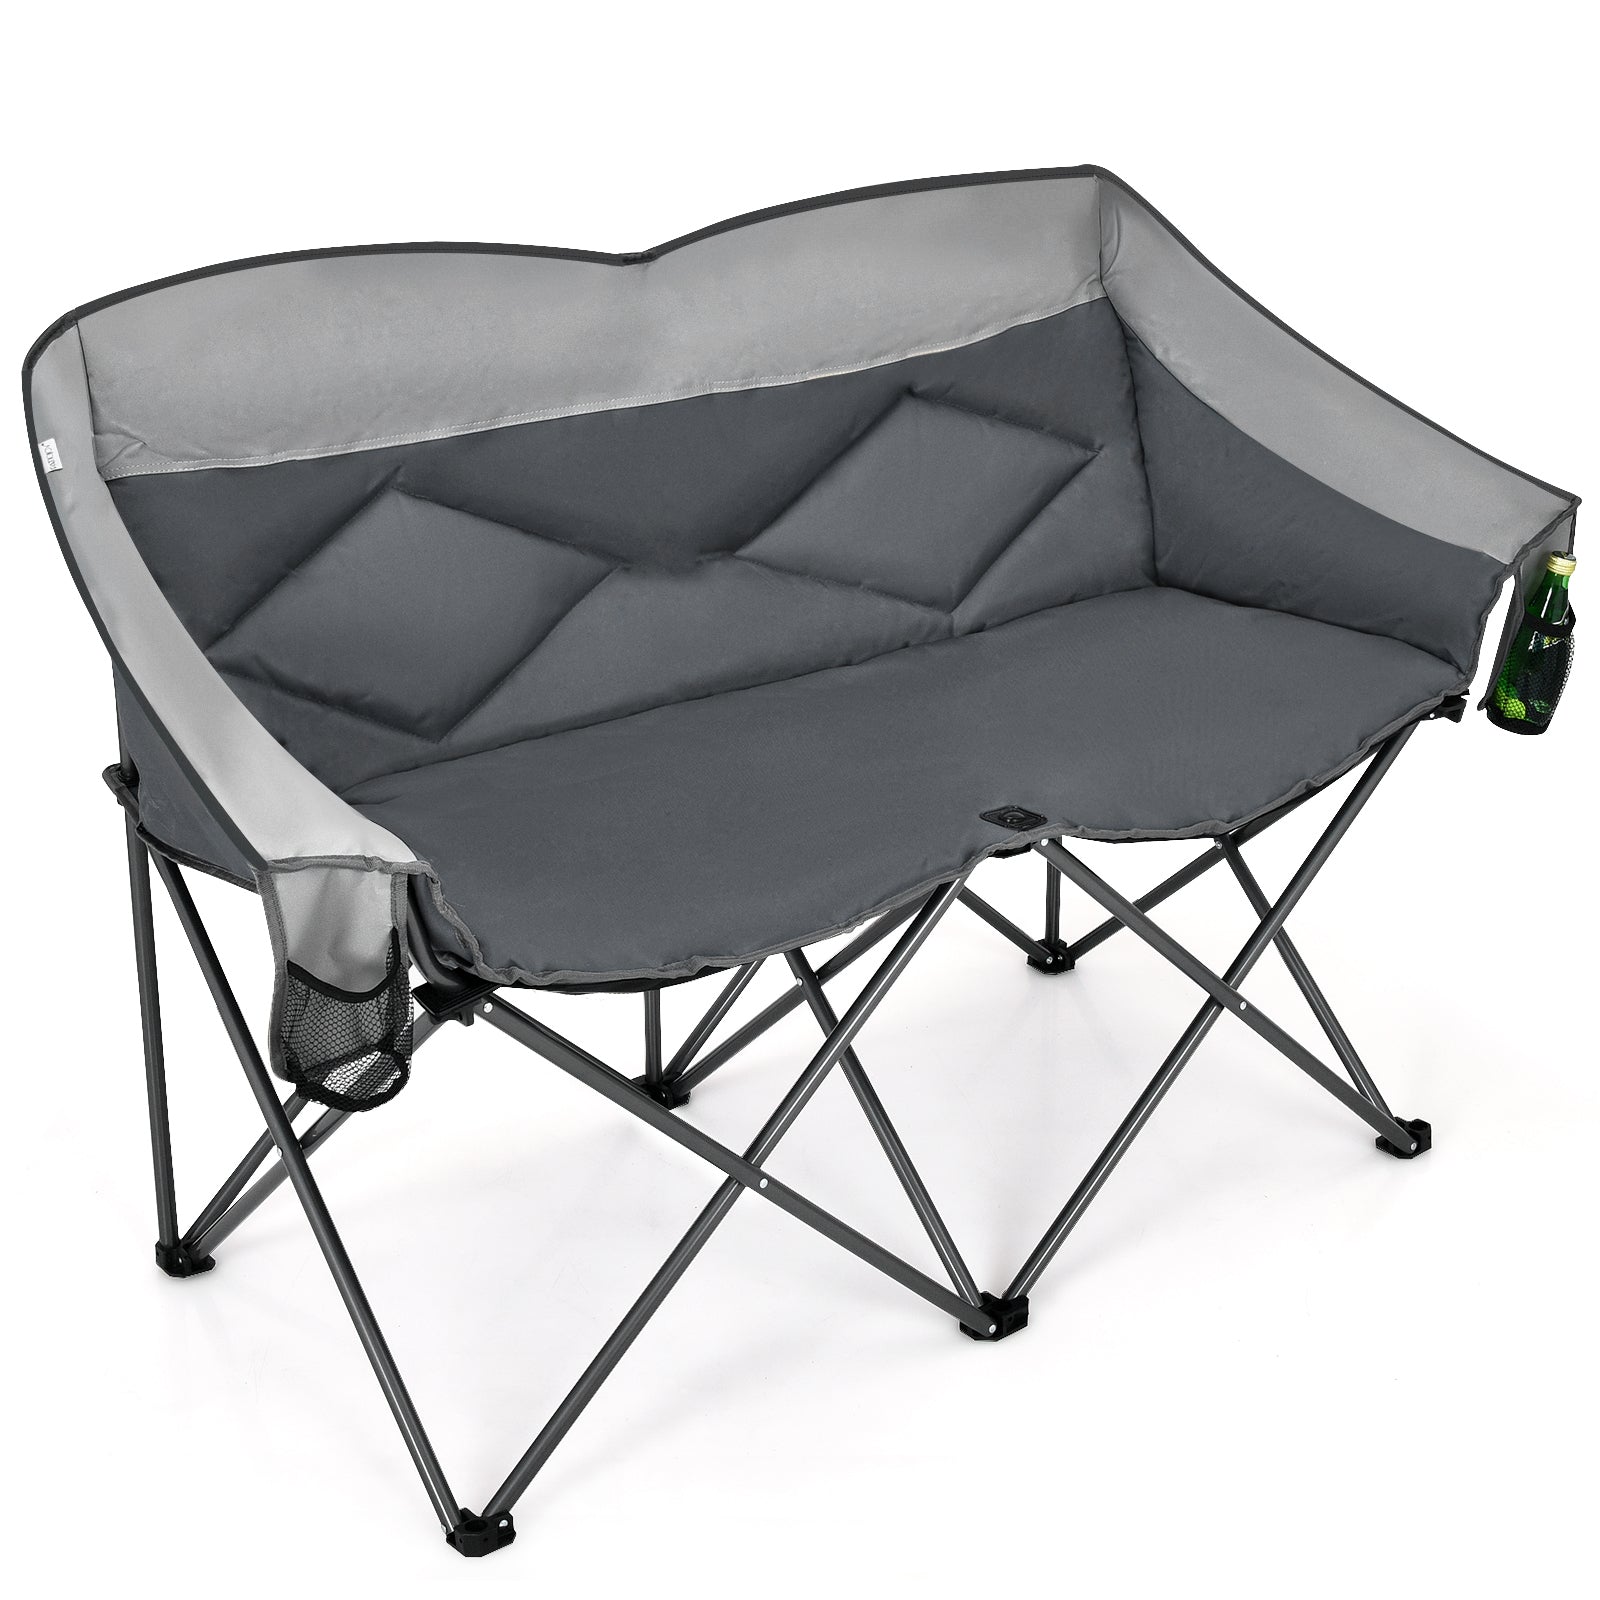 Double Folding Camping Chair with Padded Seat and Storage Pockets Grey